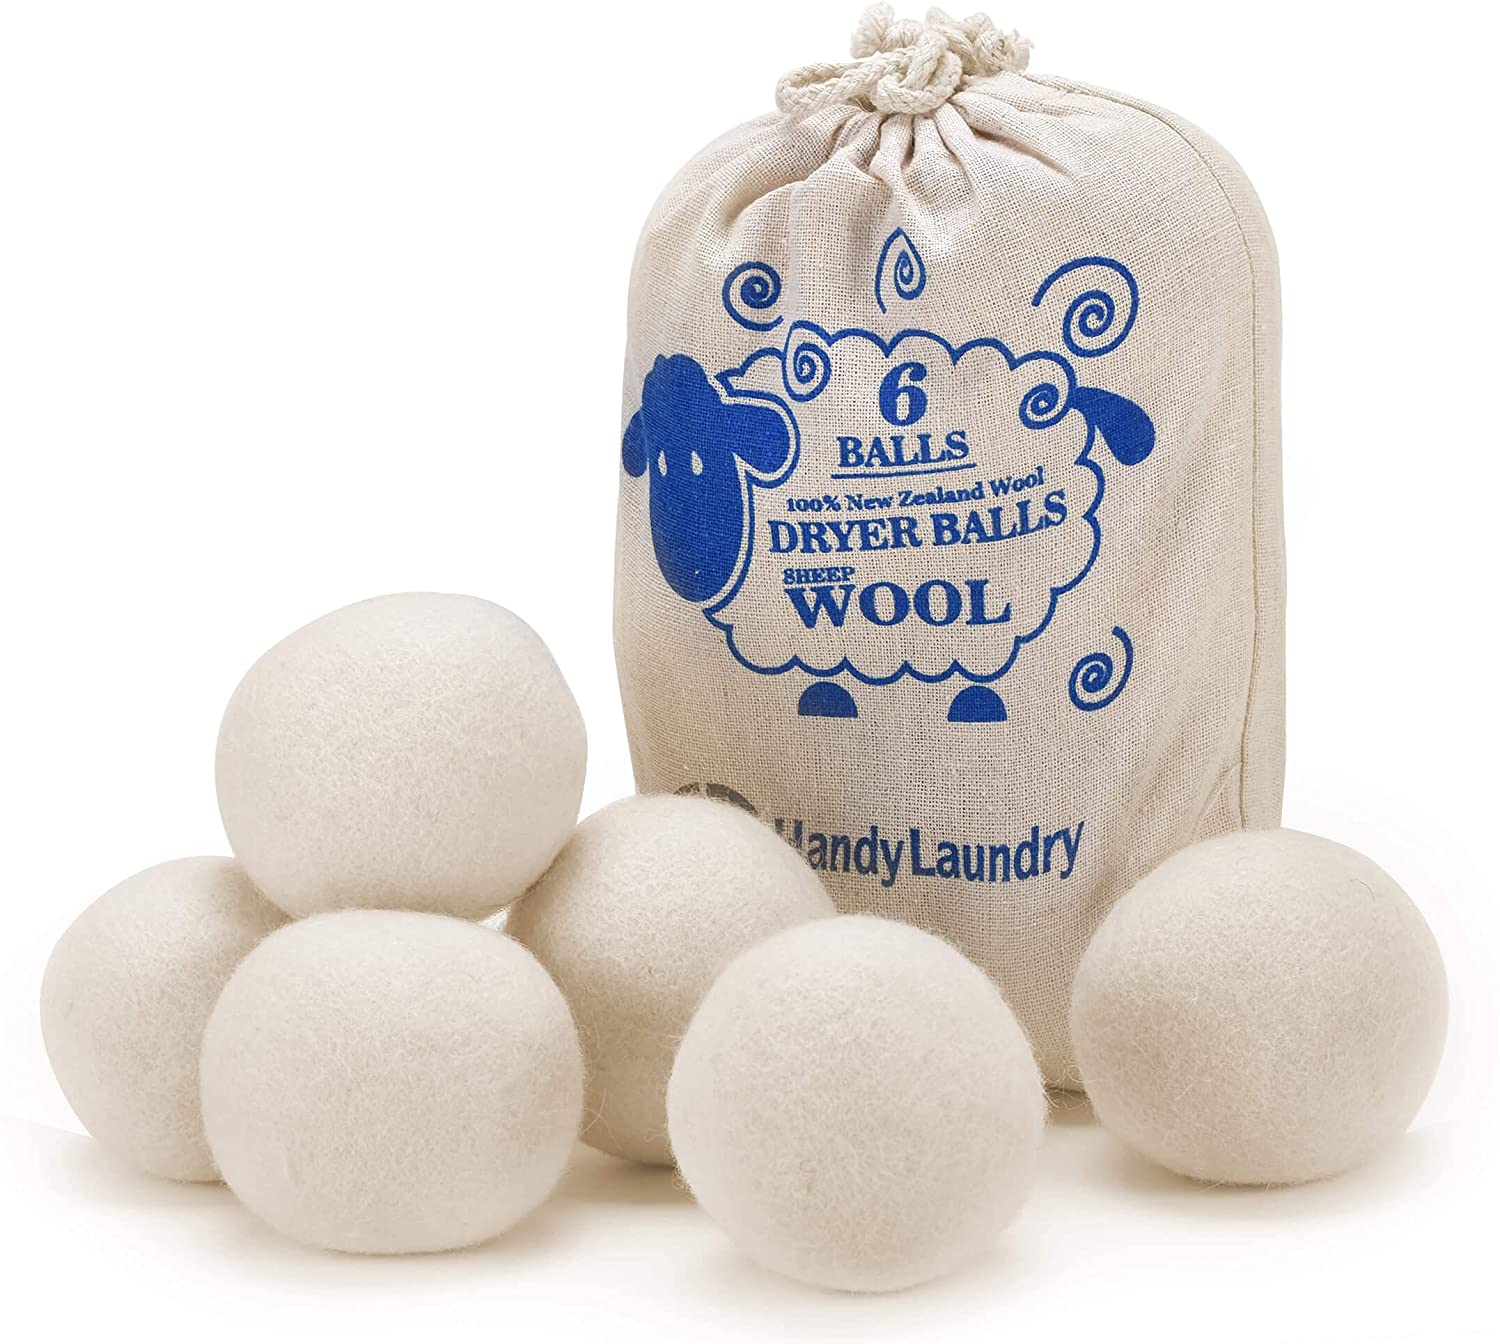 a set of wool dryer balls for laundry